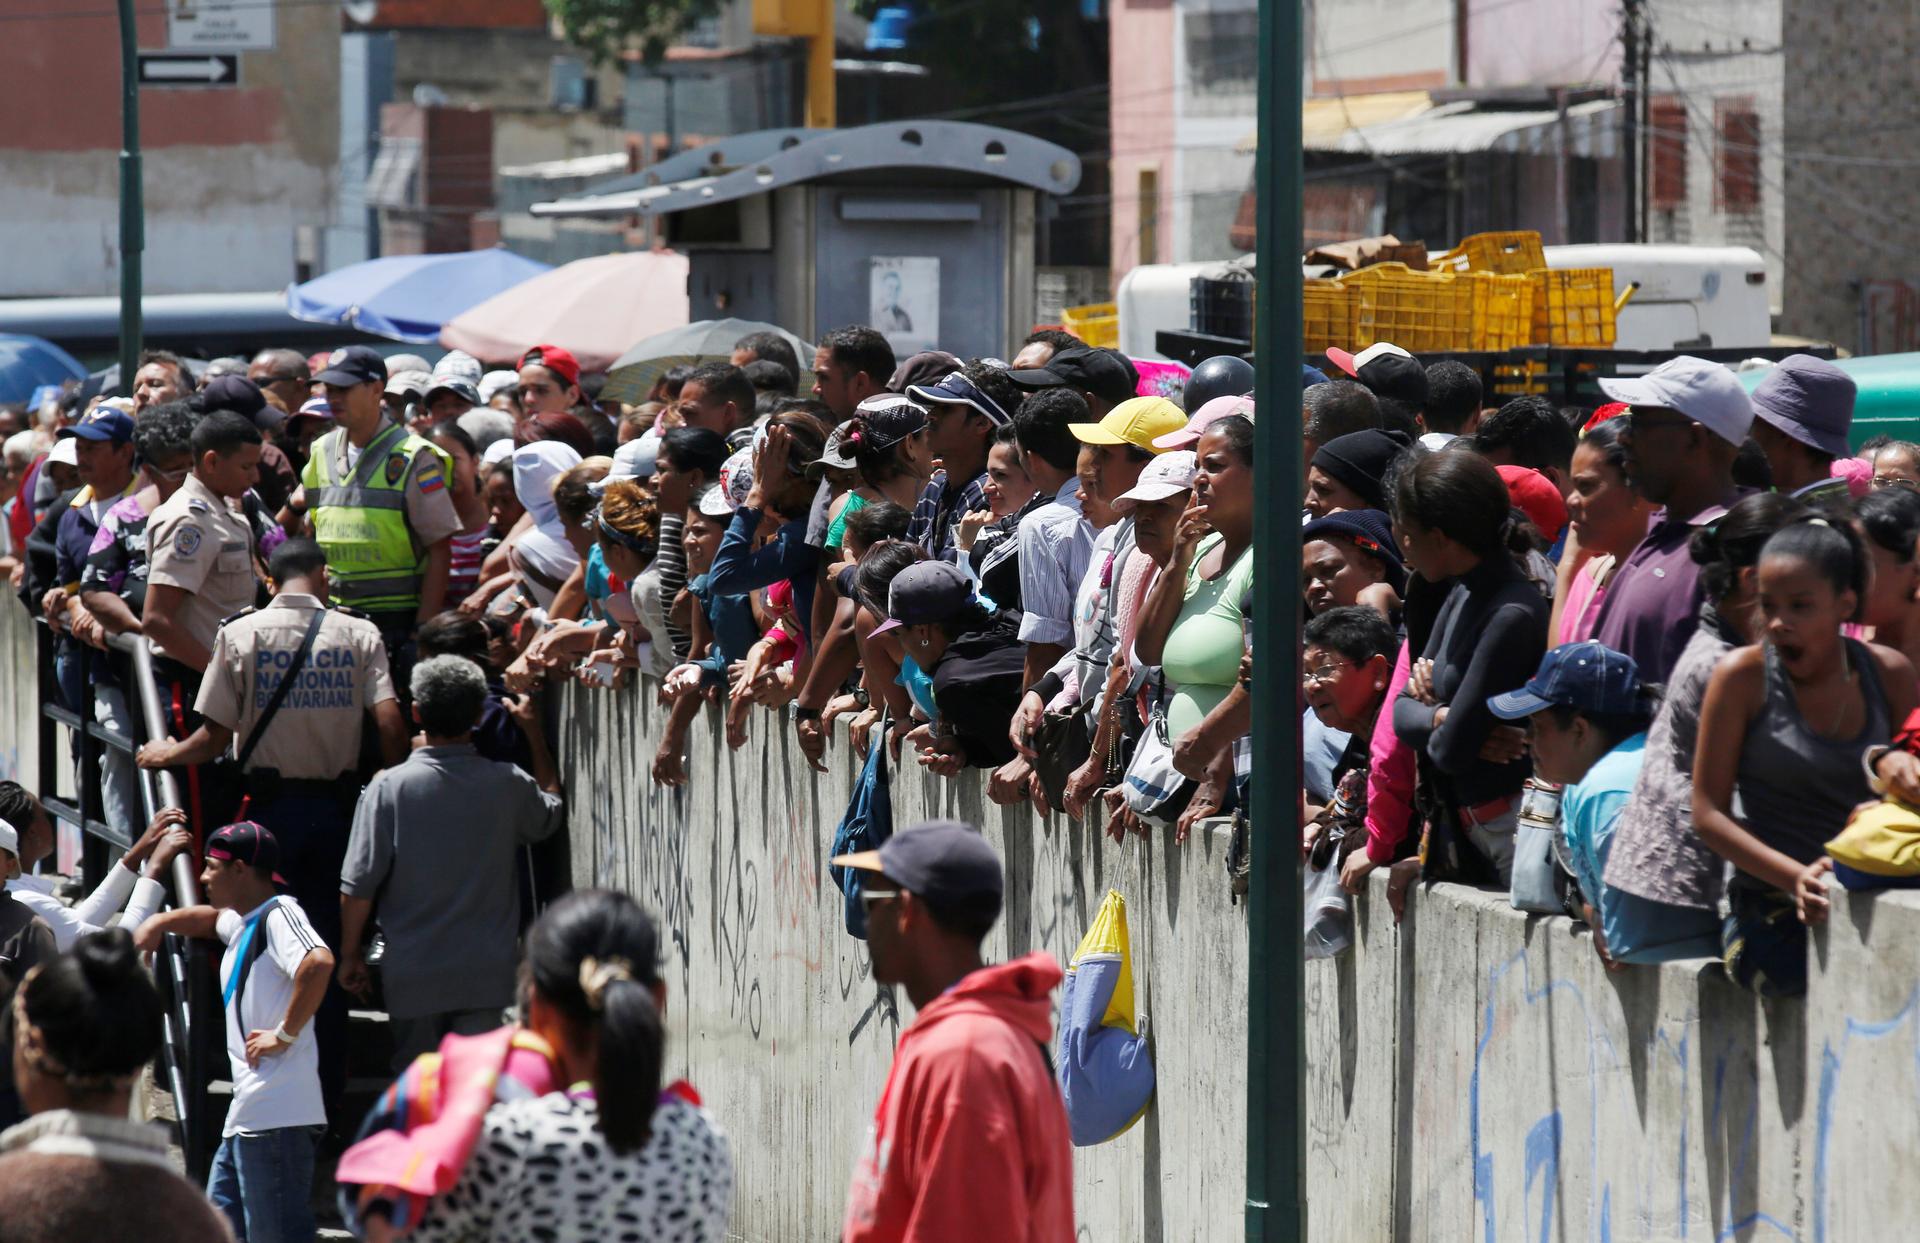 People gather to buy food and other staple goods outside a supermarket in Caracas, Venezuela June 30, 2016.